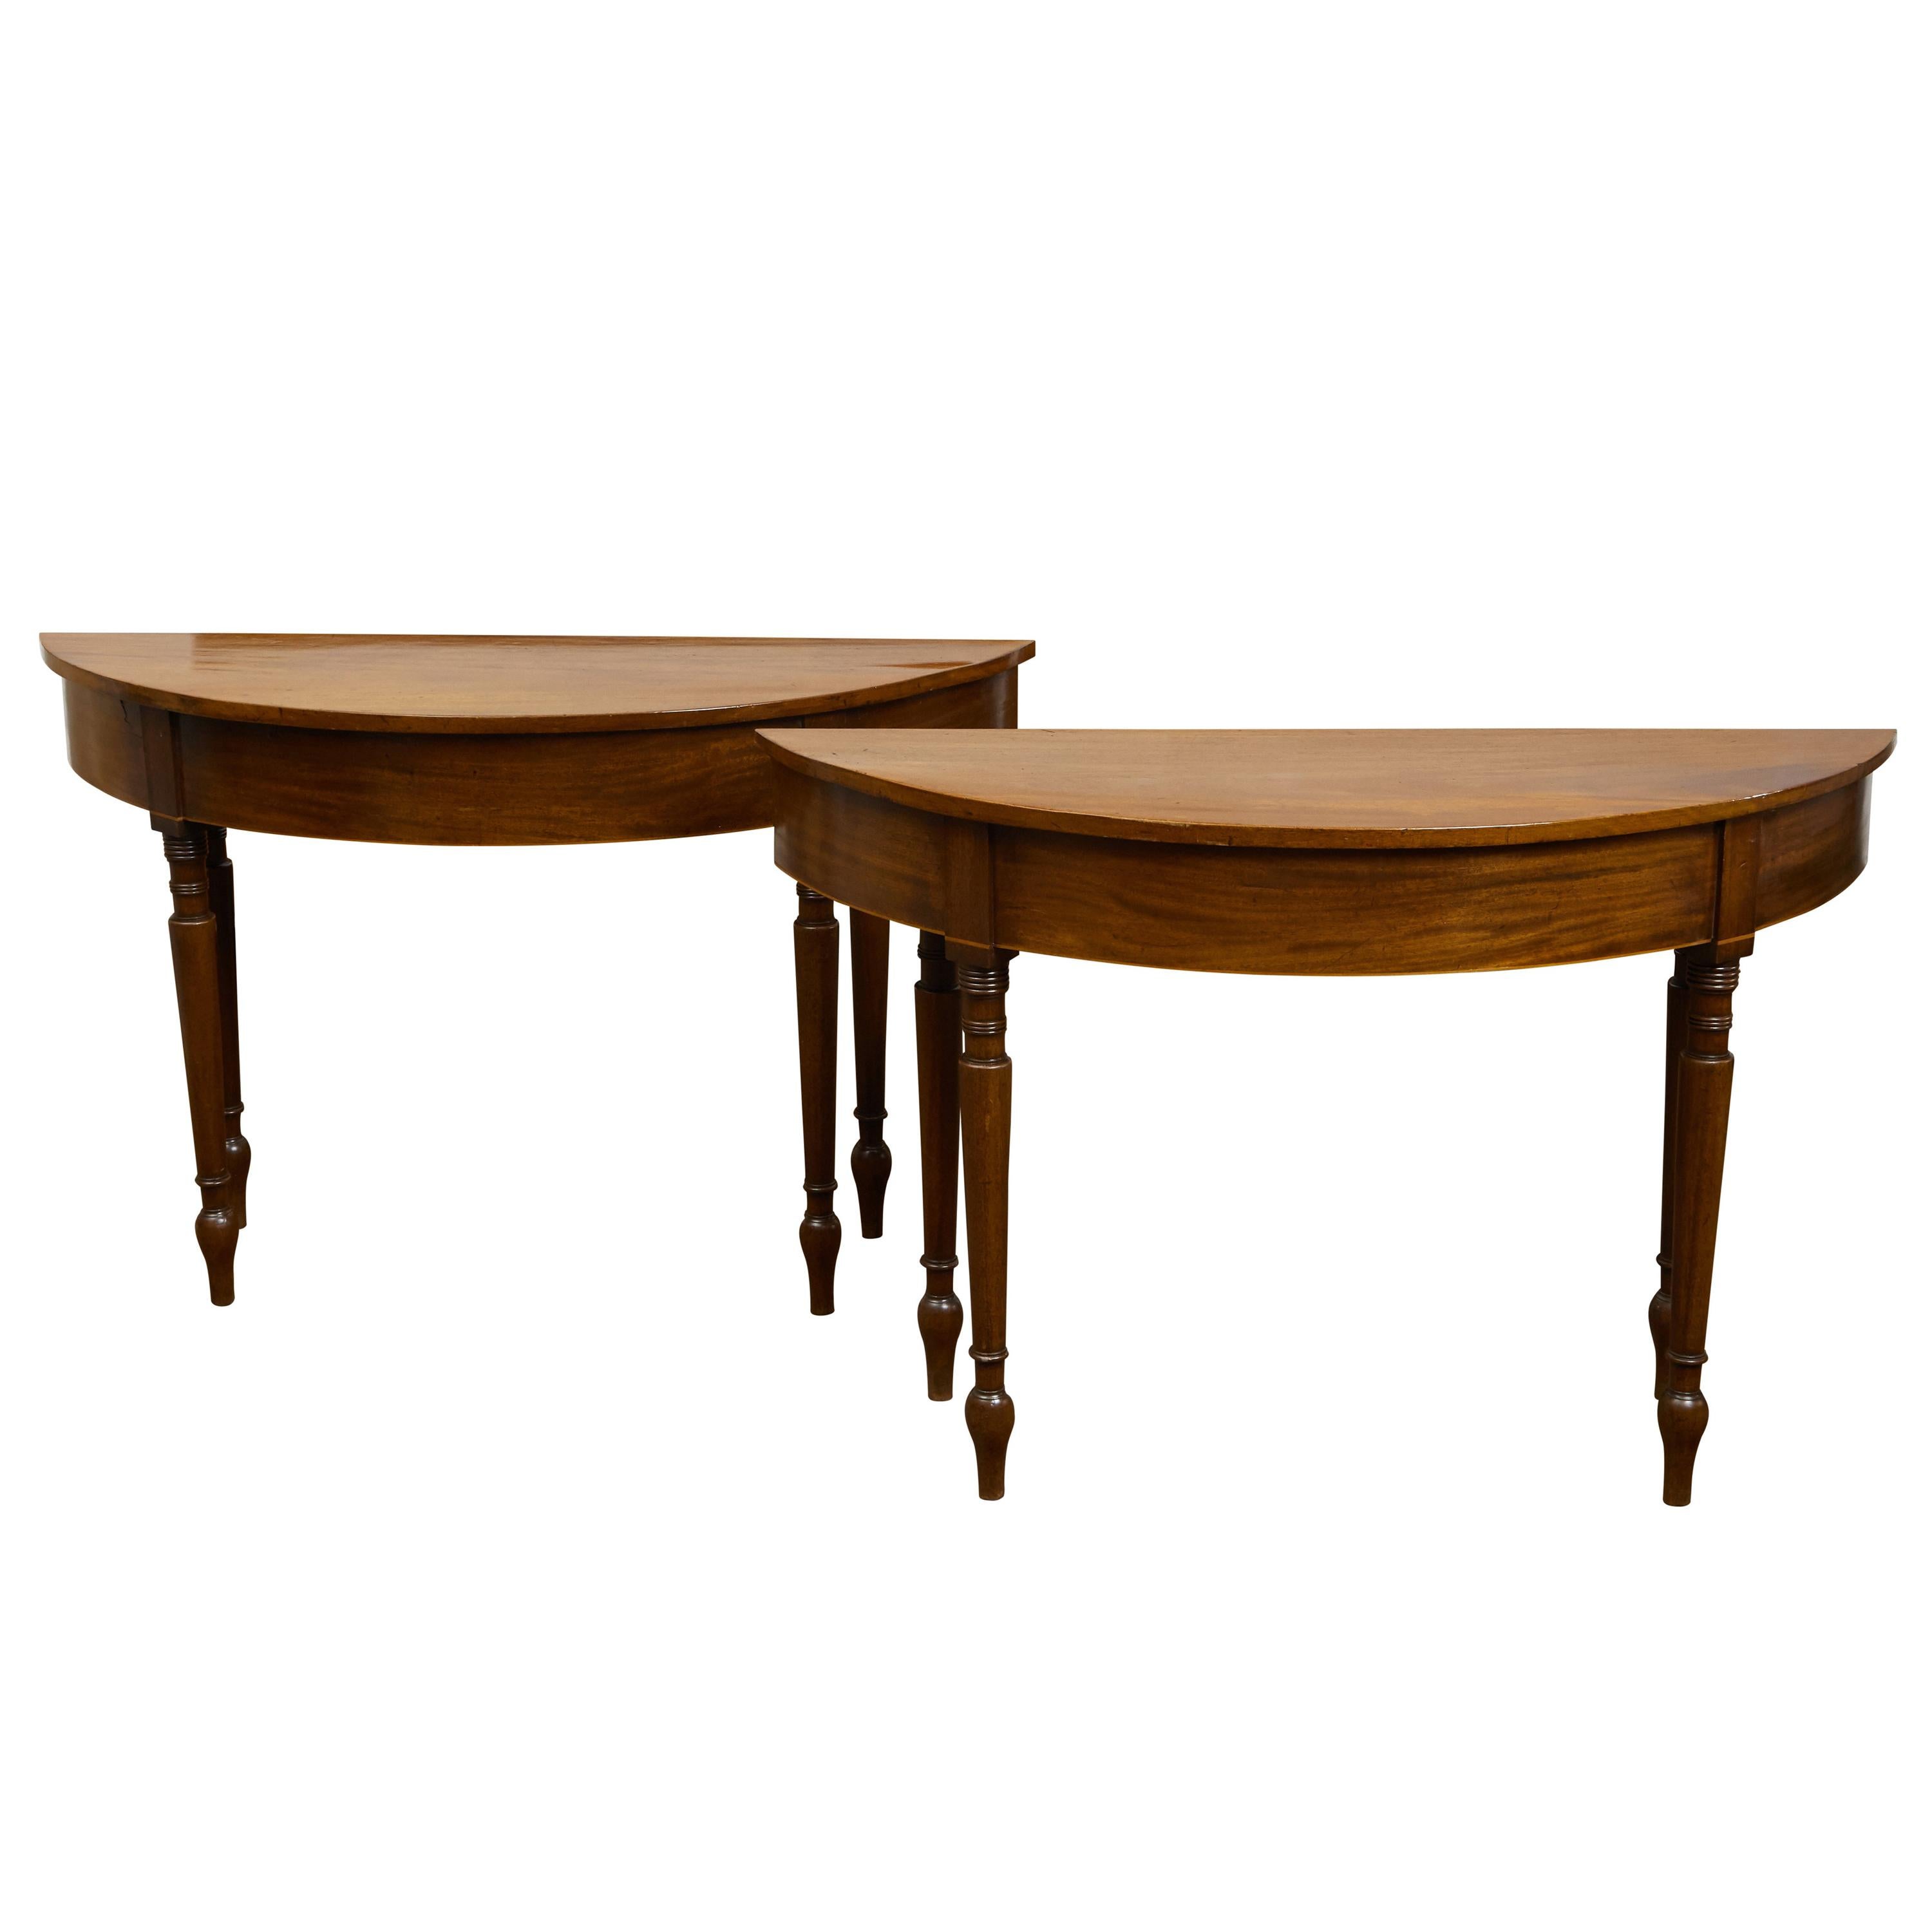 Pair of English 19th Century Mahogany Demilune Console Tables with Turned Legs